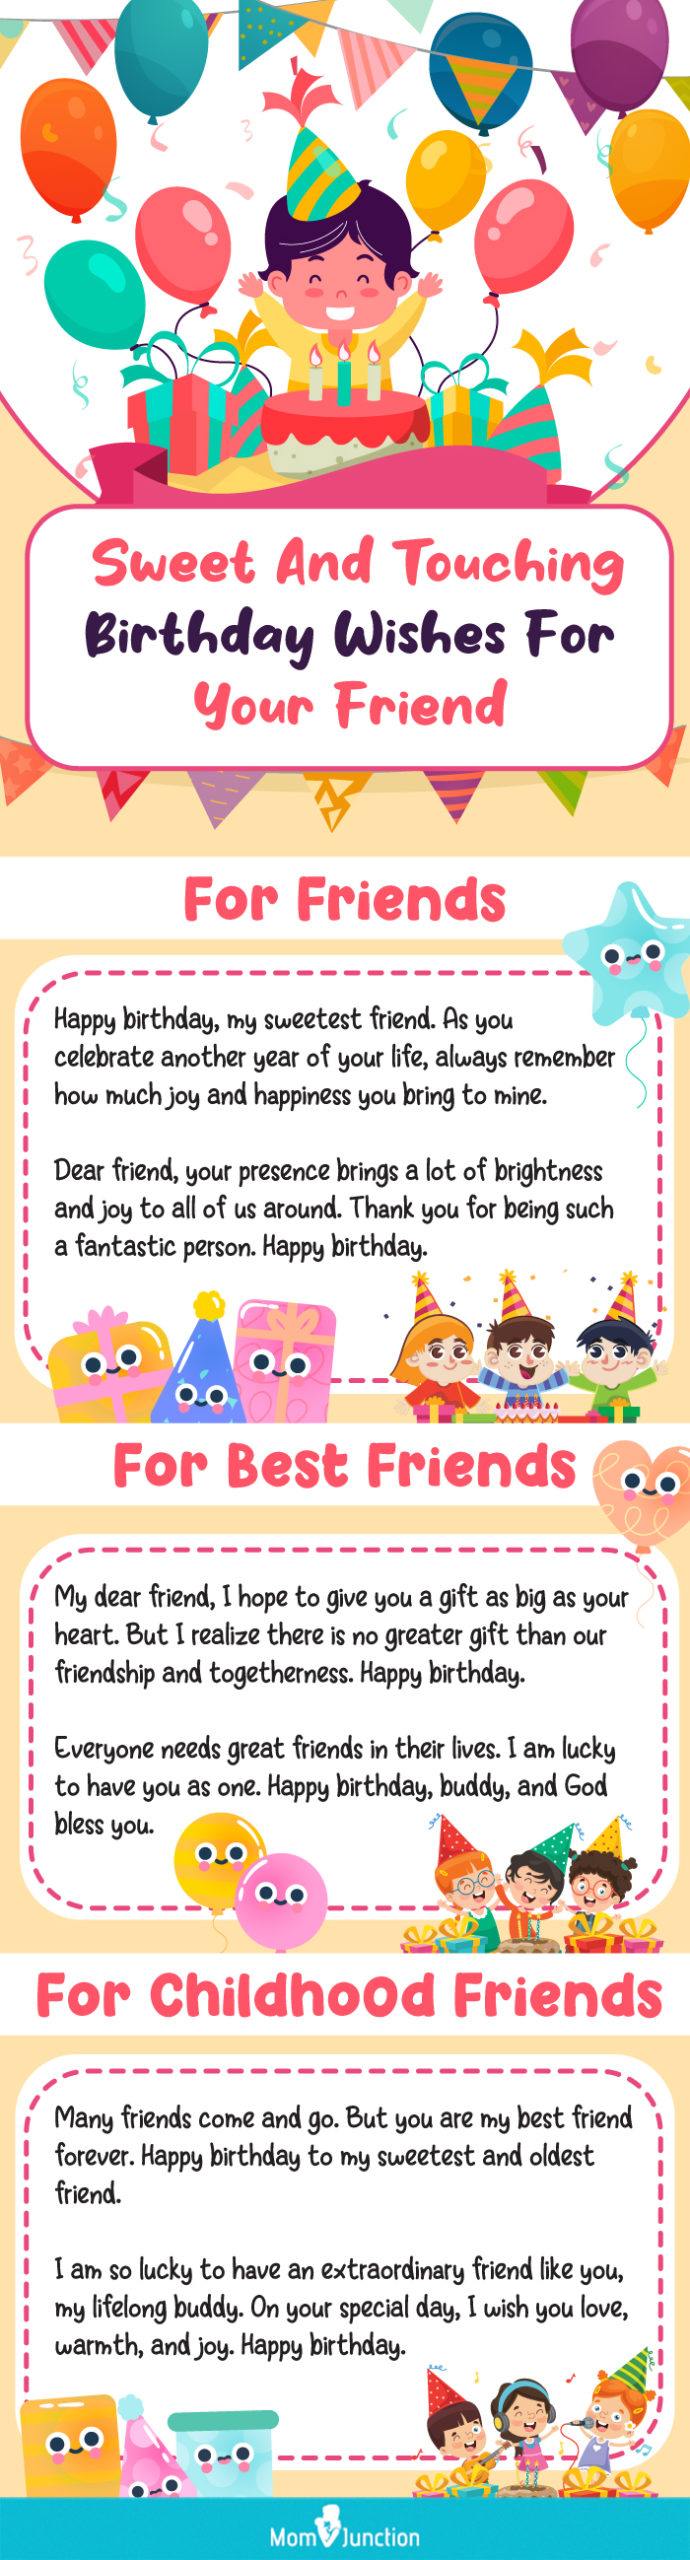 sweet and touching birthday wishes for your friend (infographic)